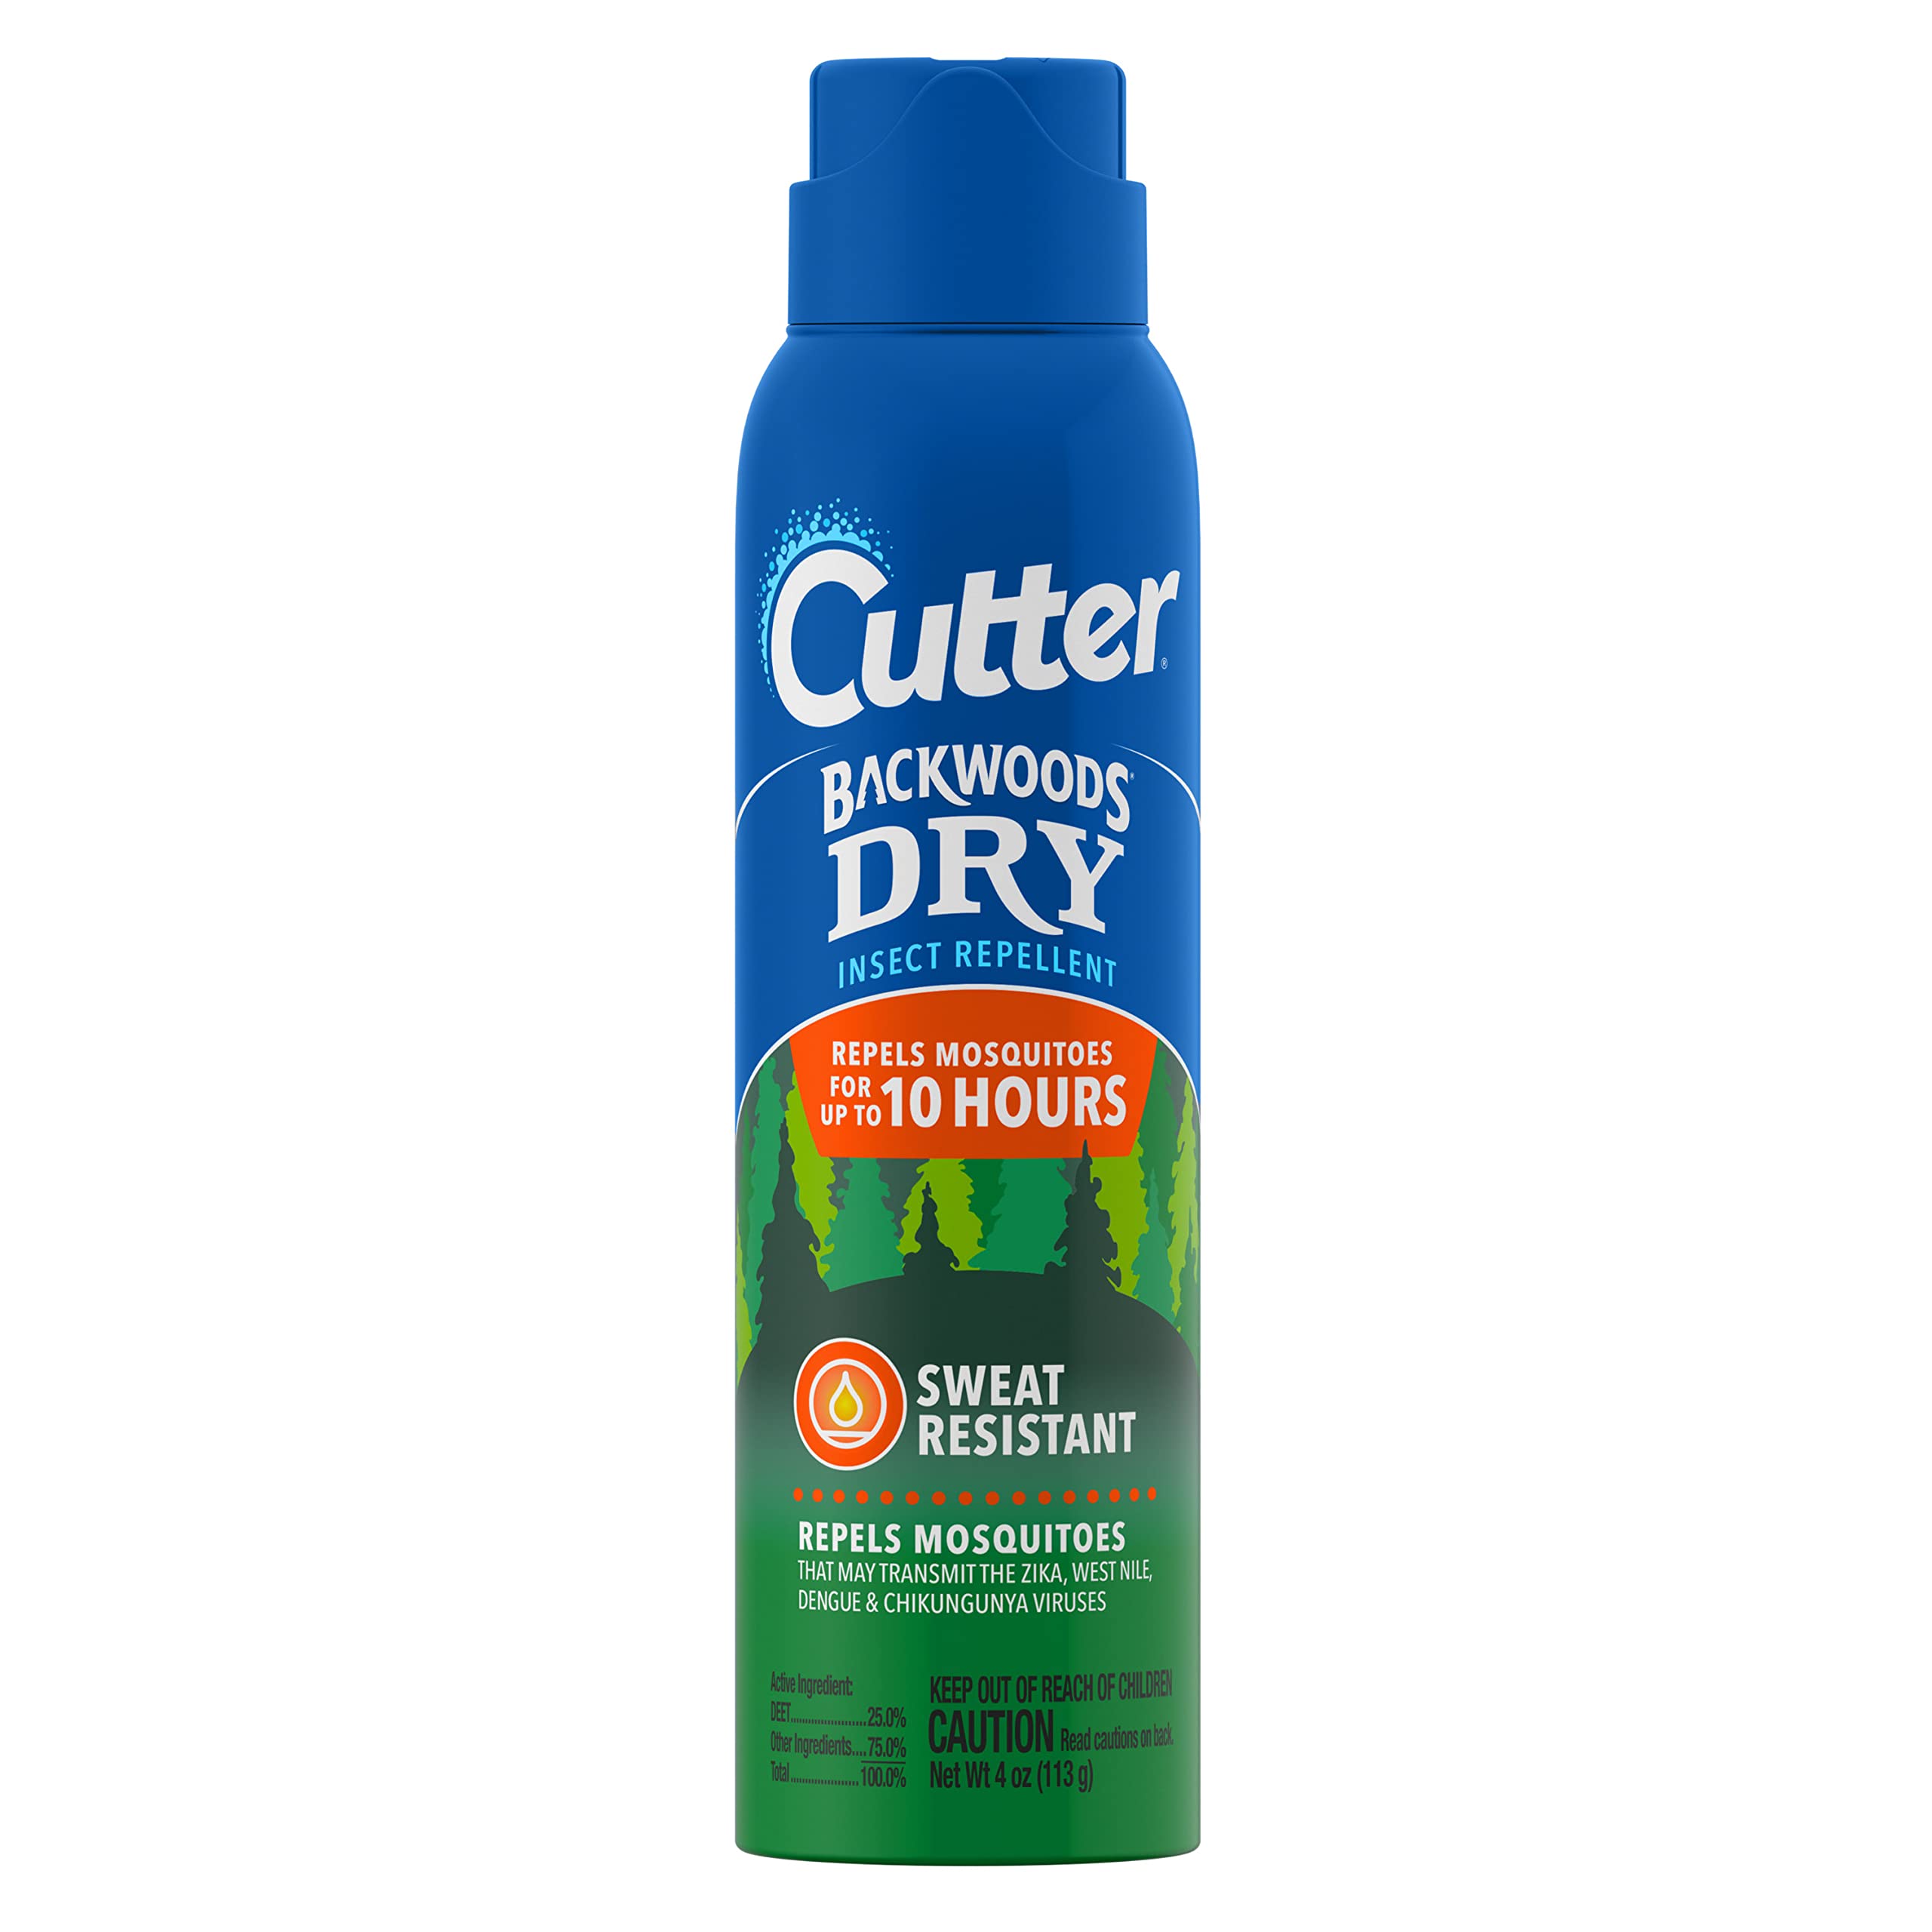 4-Oz Cutter Backwoods Dry Insect Mosquito Repellent w/ 25% DEET & Sweat Resistent (Aerosol Spray) $3.40 + Free Shipping w/ Prime or on $35+